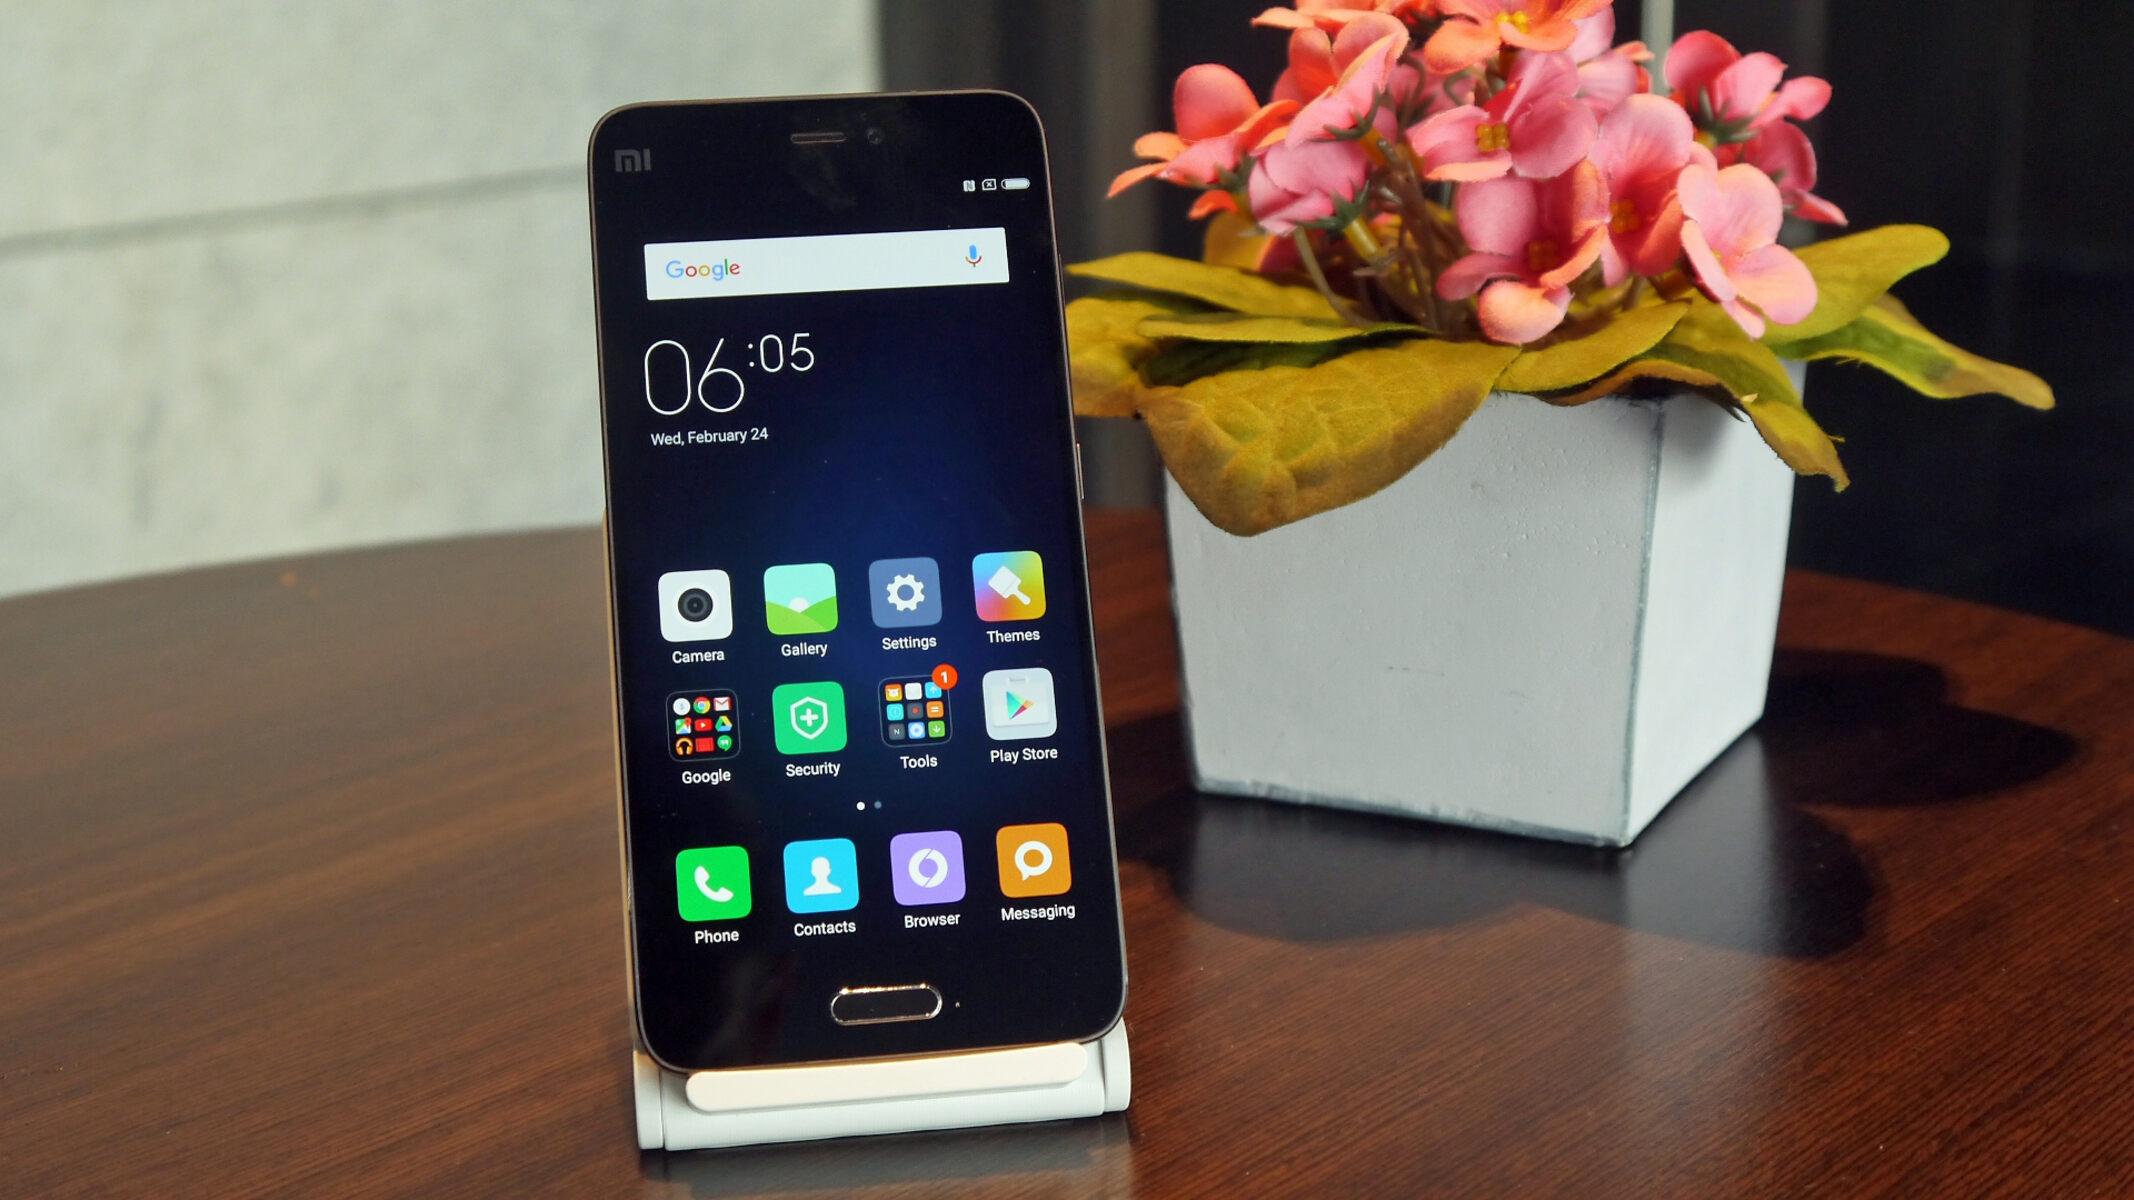 Xiaomi Mi5: Understanding Network Compatibility For Seamless Use In Canada